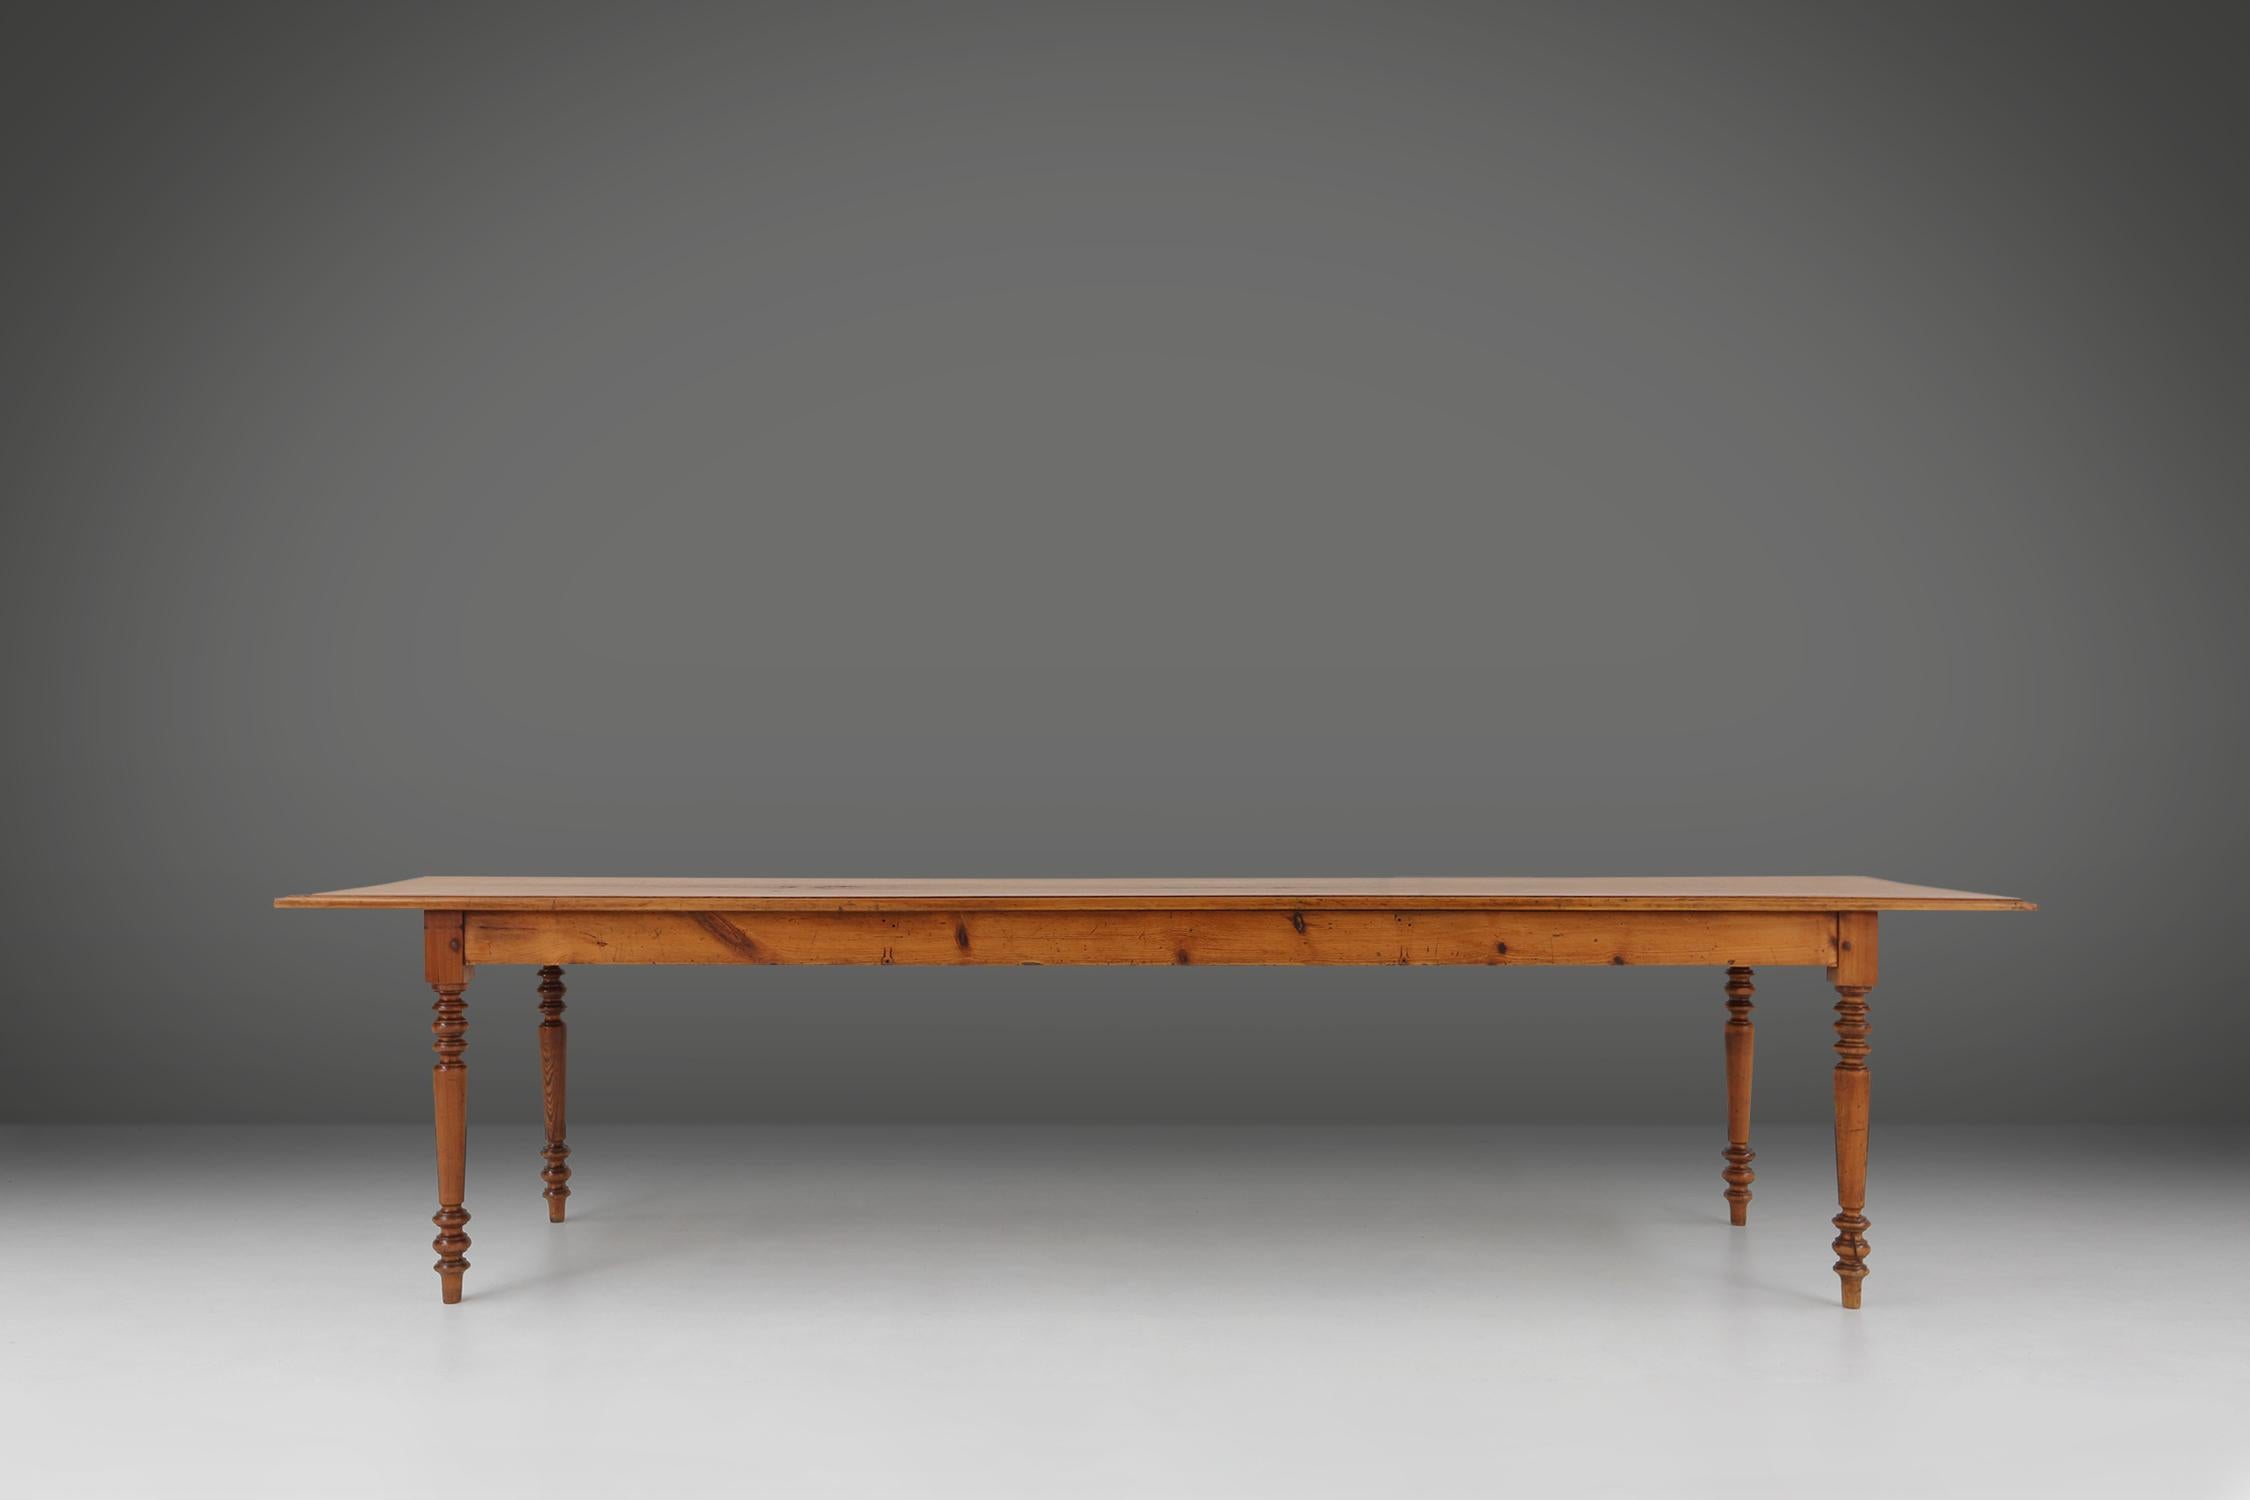 
Discover the timeless elegance and craftsmanship of this refined antique table. Made from full pine in 19th century France, this table has a beautiful patina on the wood that attests to its long history and character.

With its rich wooden finish